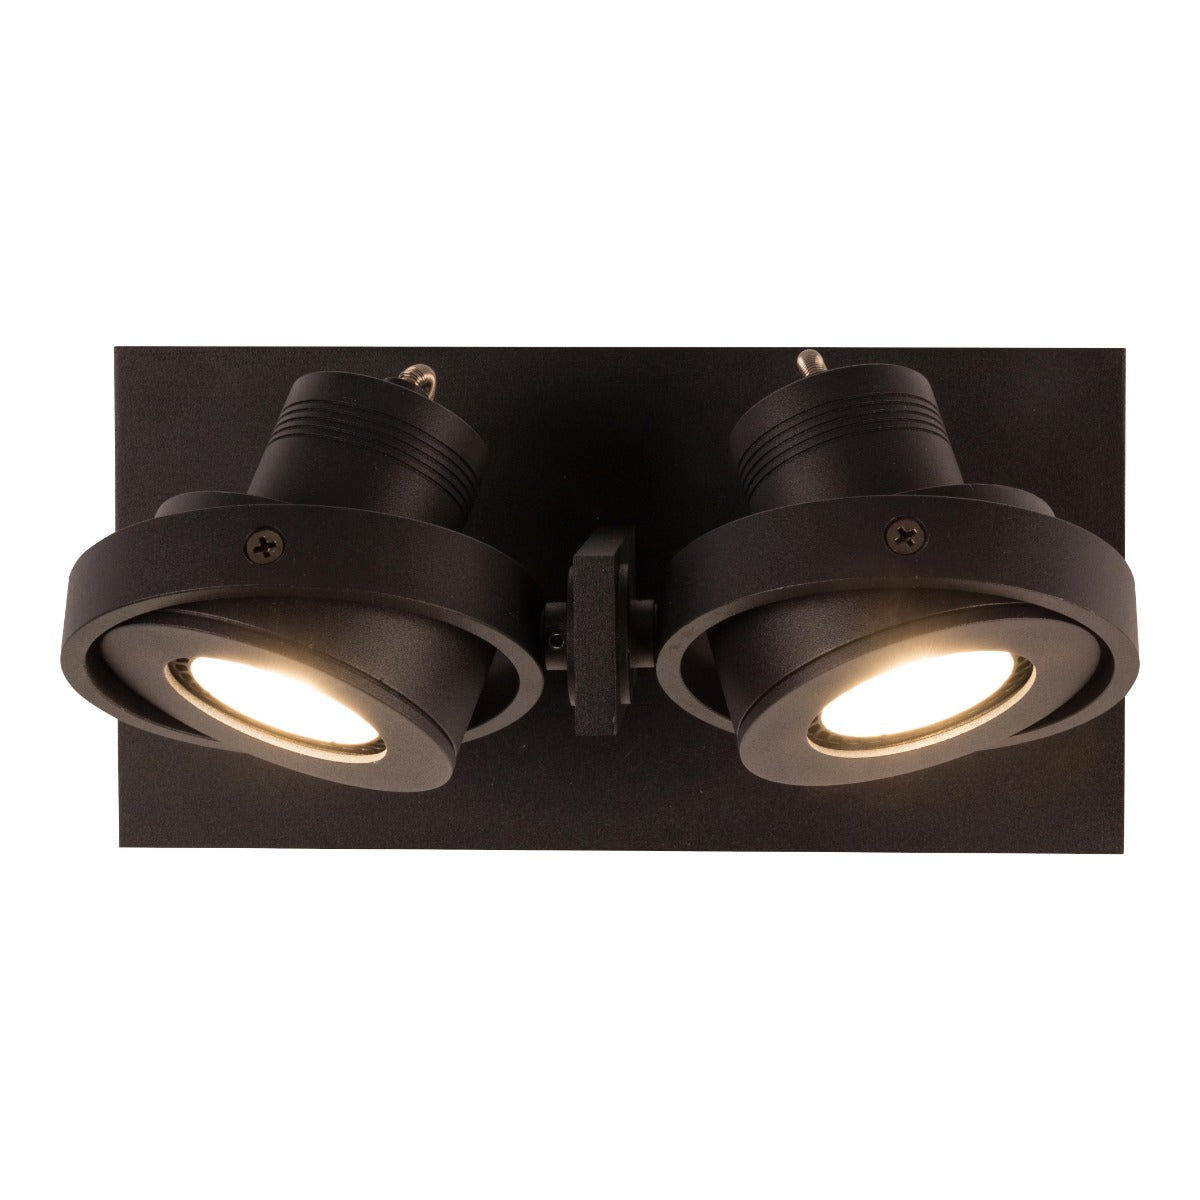 LUCI-2 DTW two-point lamp black, Zuiver, Eye on Design